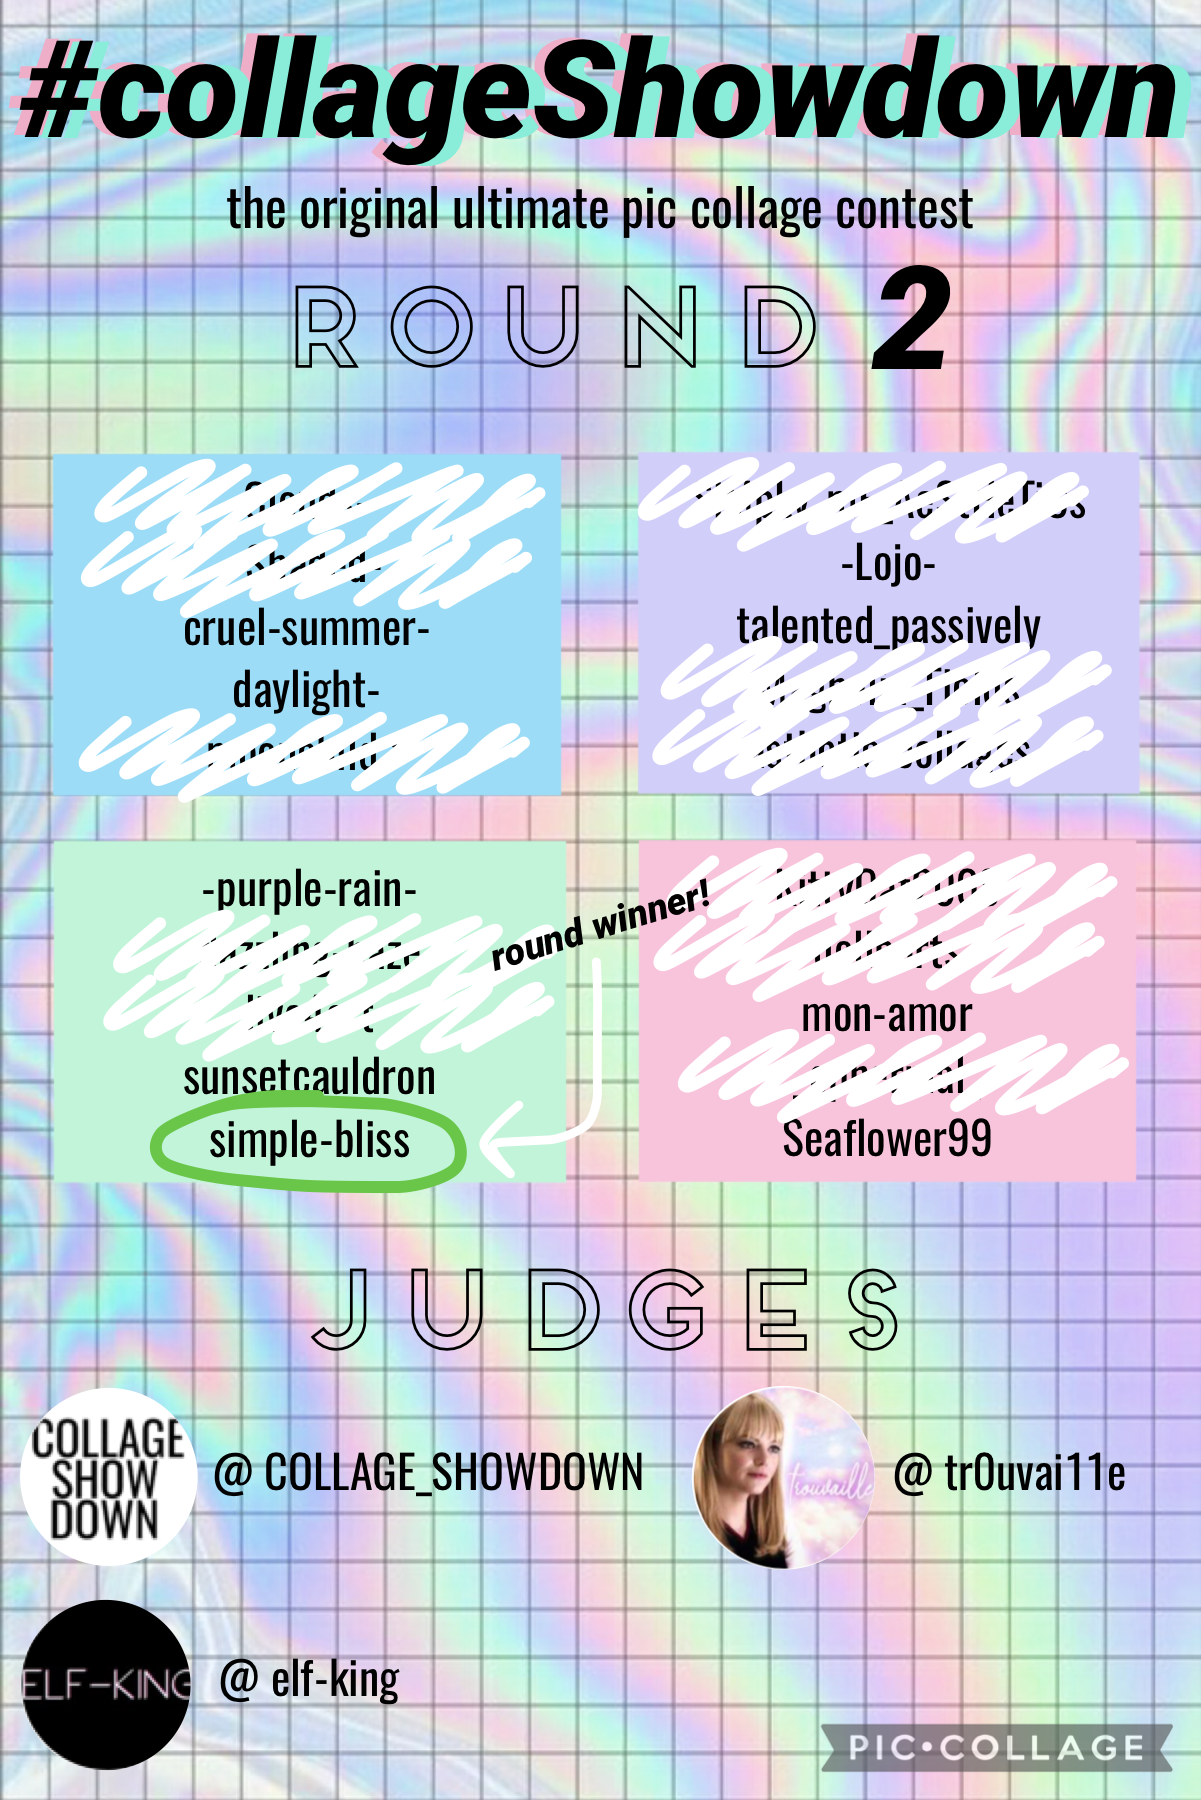 Long awaited round 2 results! Round 3 posted soon!